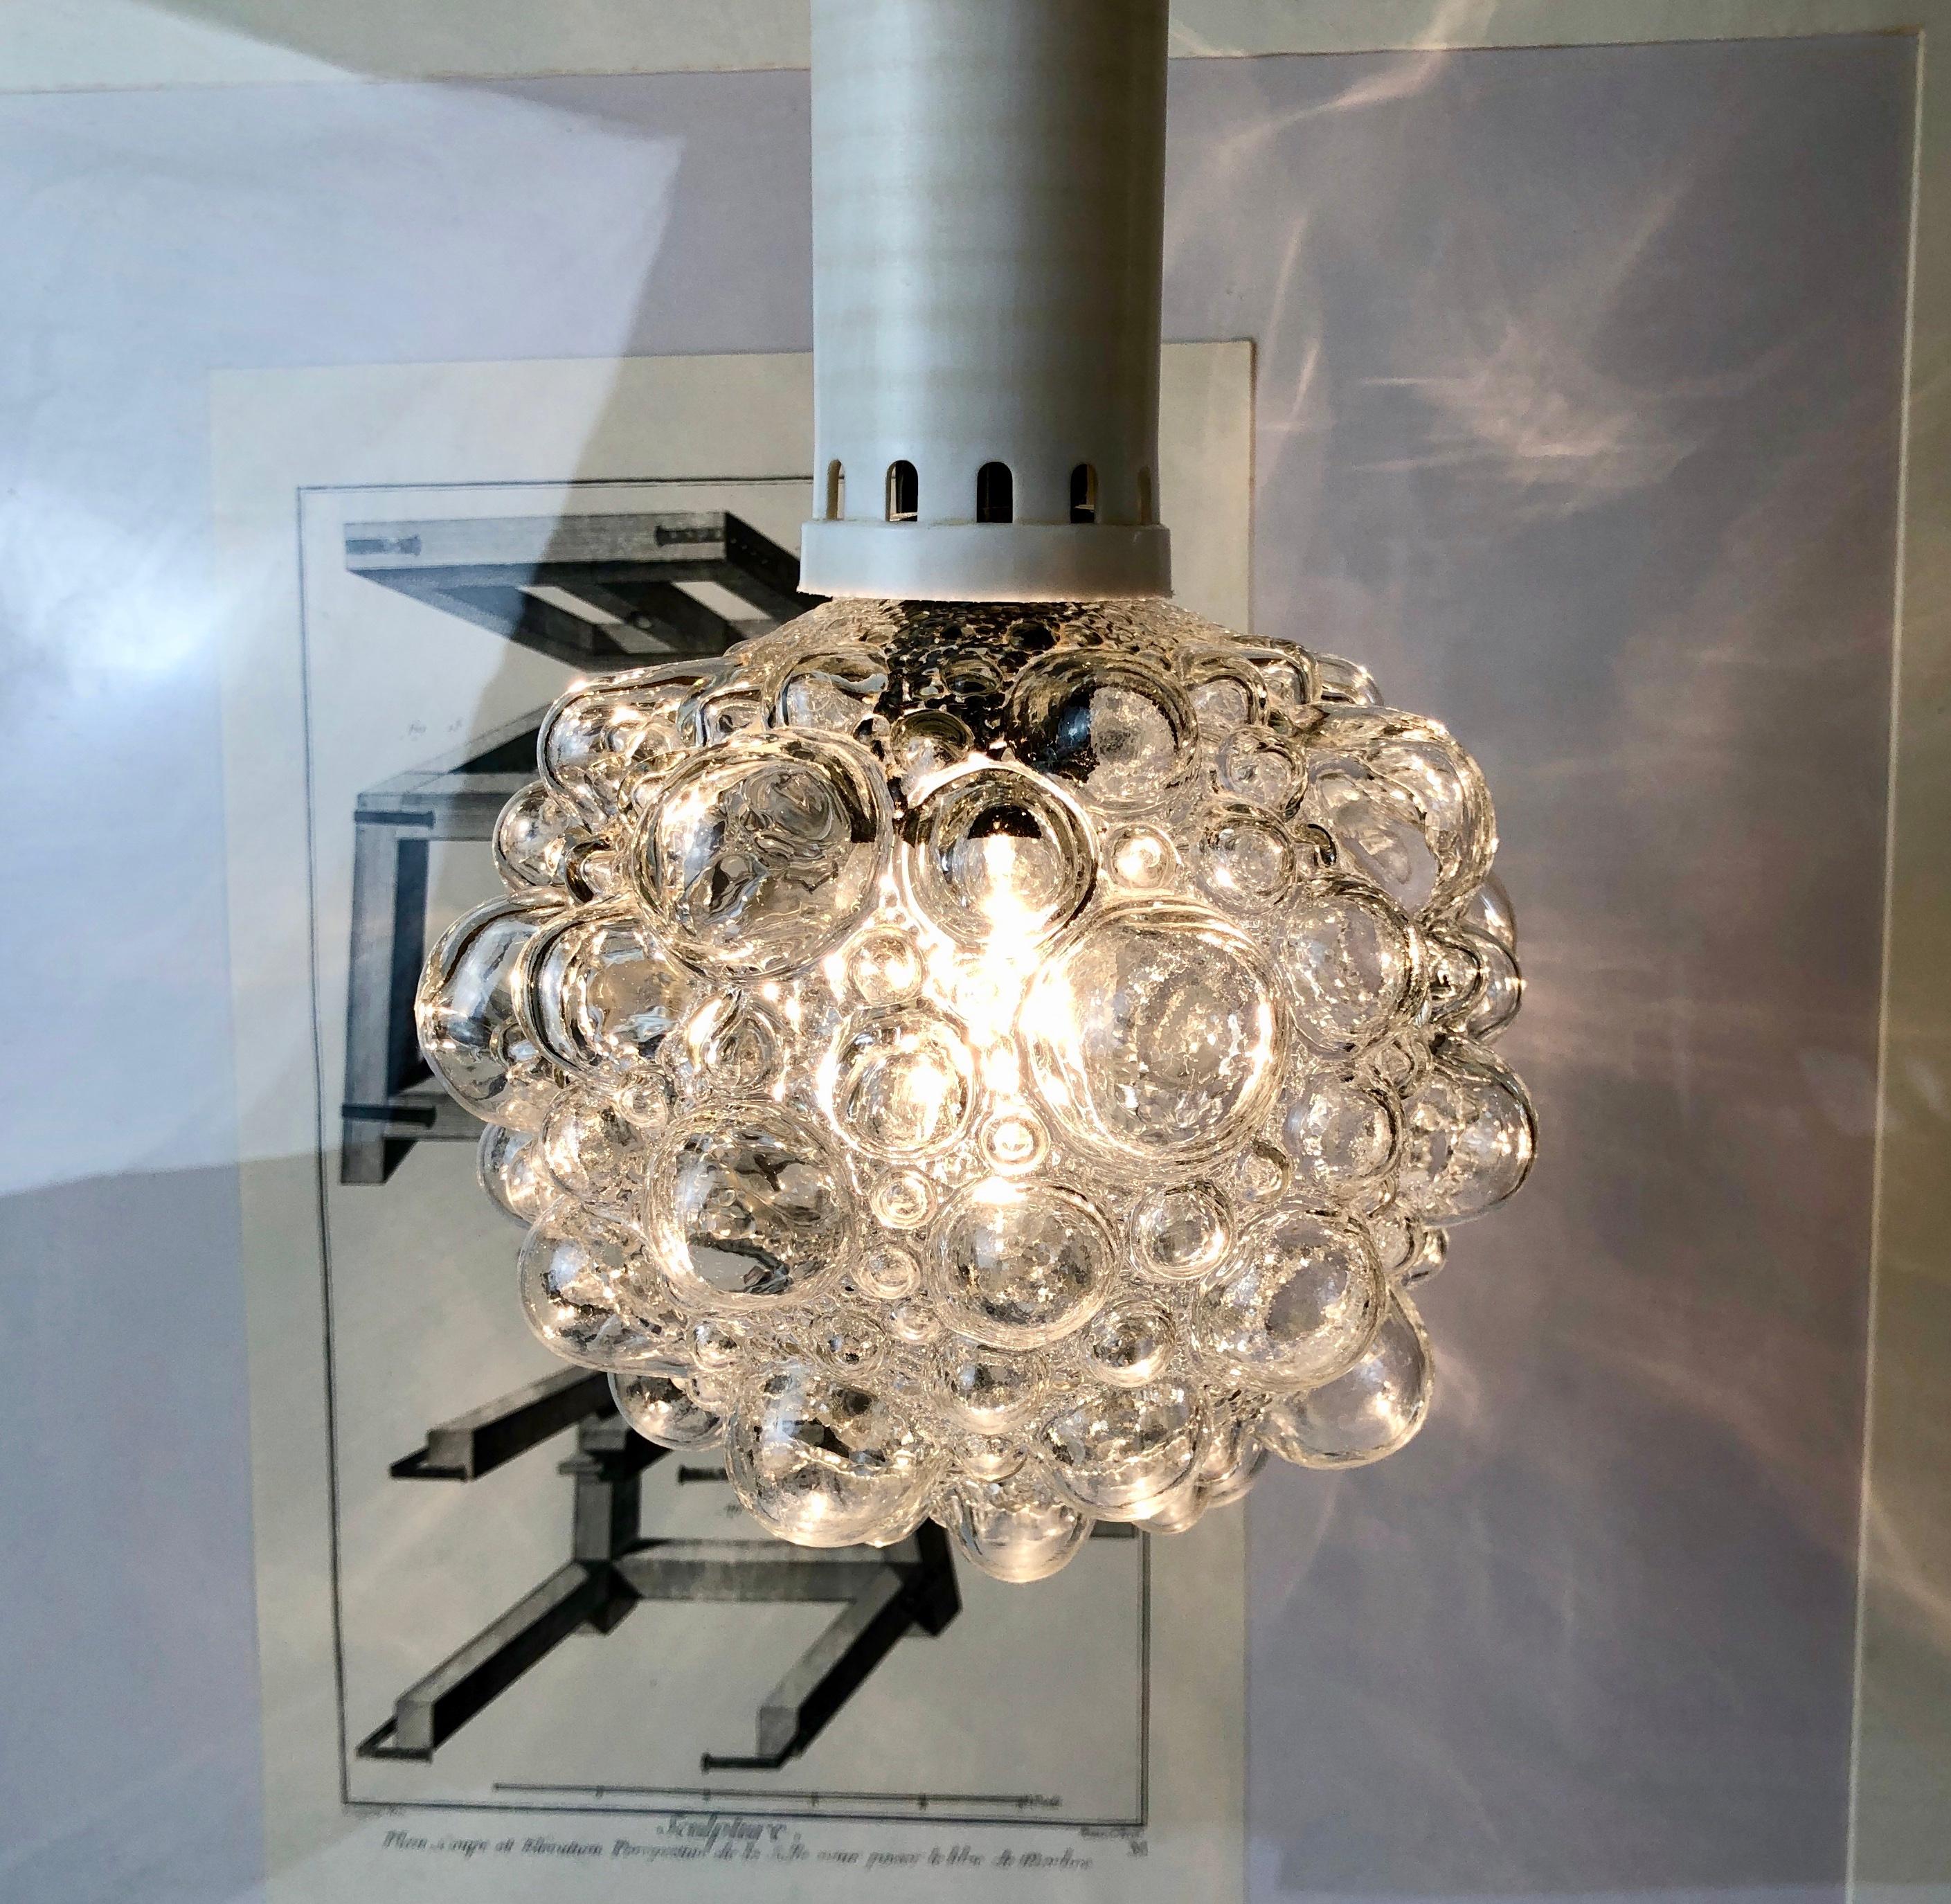 Beautifully designed small pendant lamp by Finnish mid-century artist Helena Tynell for Limburger Glashuette, Germany.
The design for this very lamp is around 1959.
I assume, this is one of the very first bubble lamps Helena Tynell designed.
Large